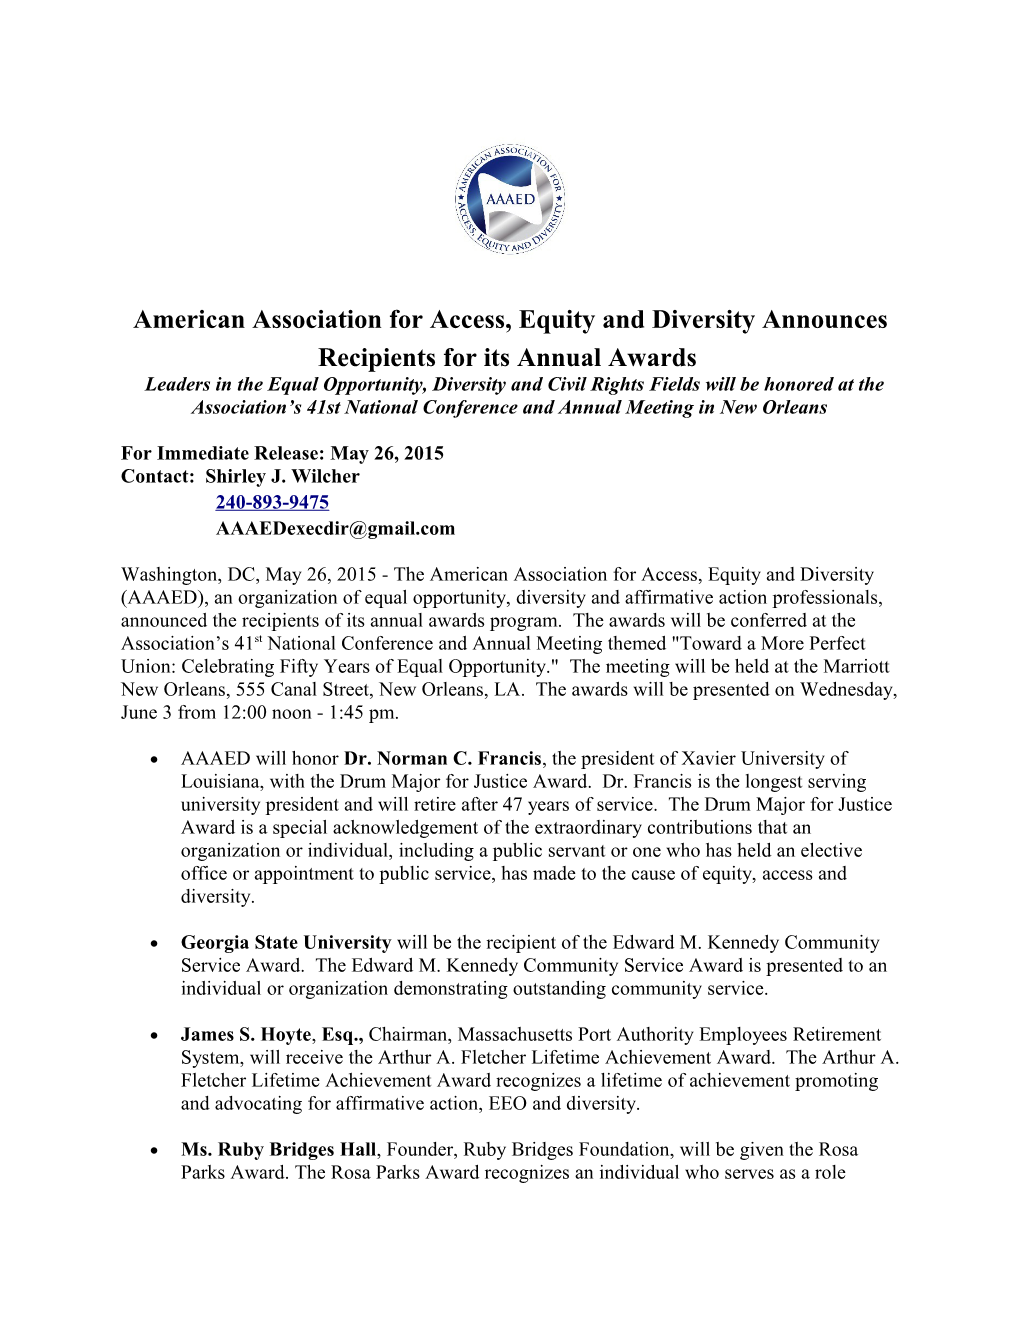 American Association for Access, Equity and Diversity Announces